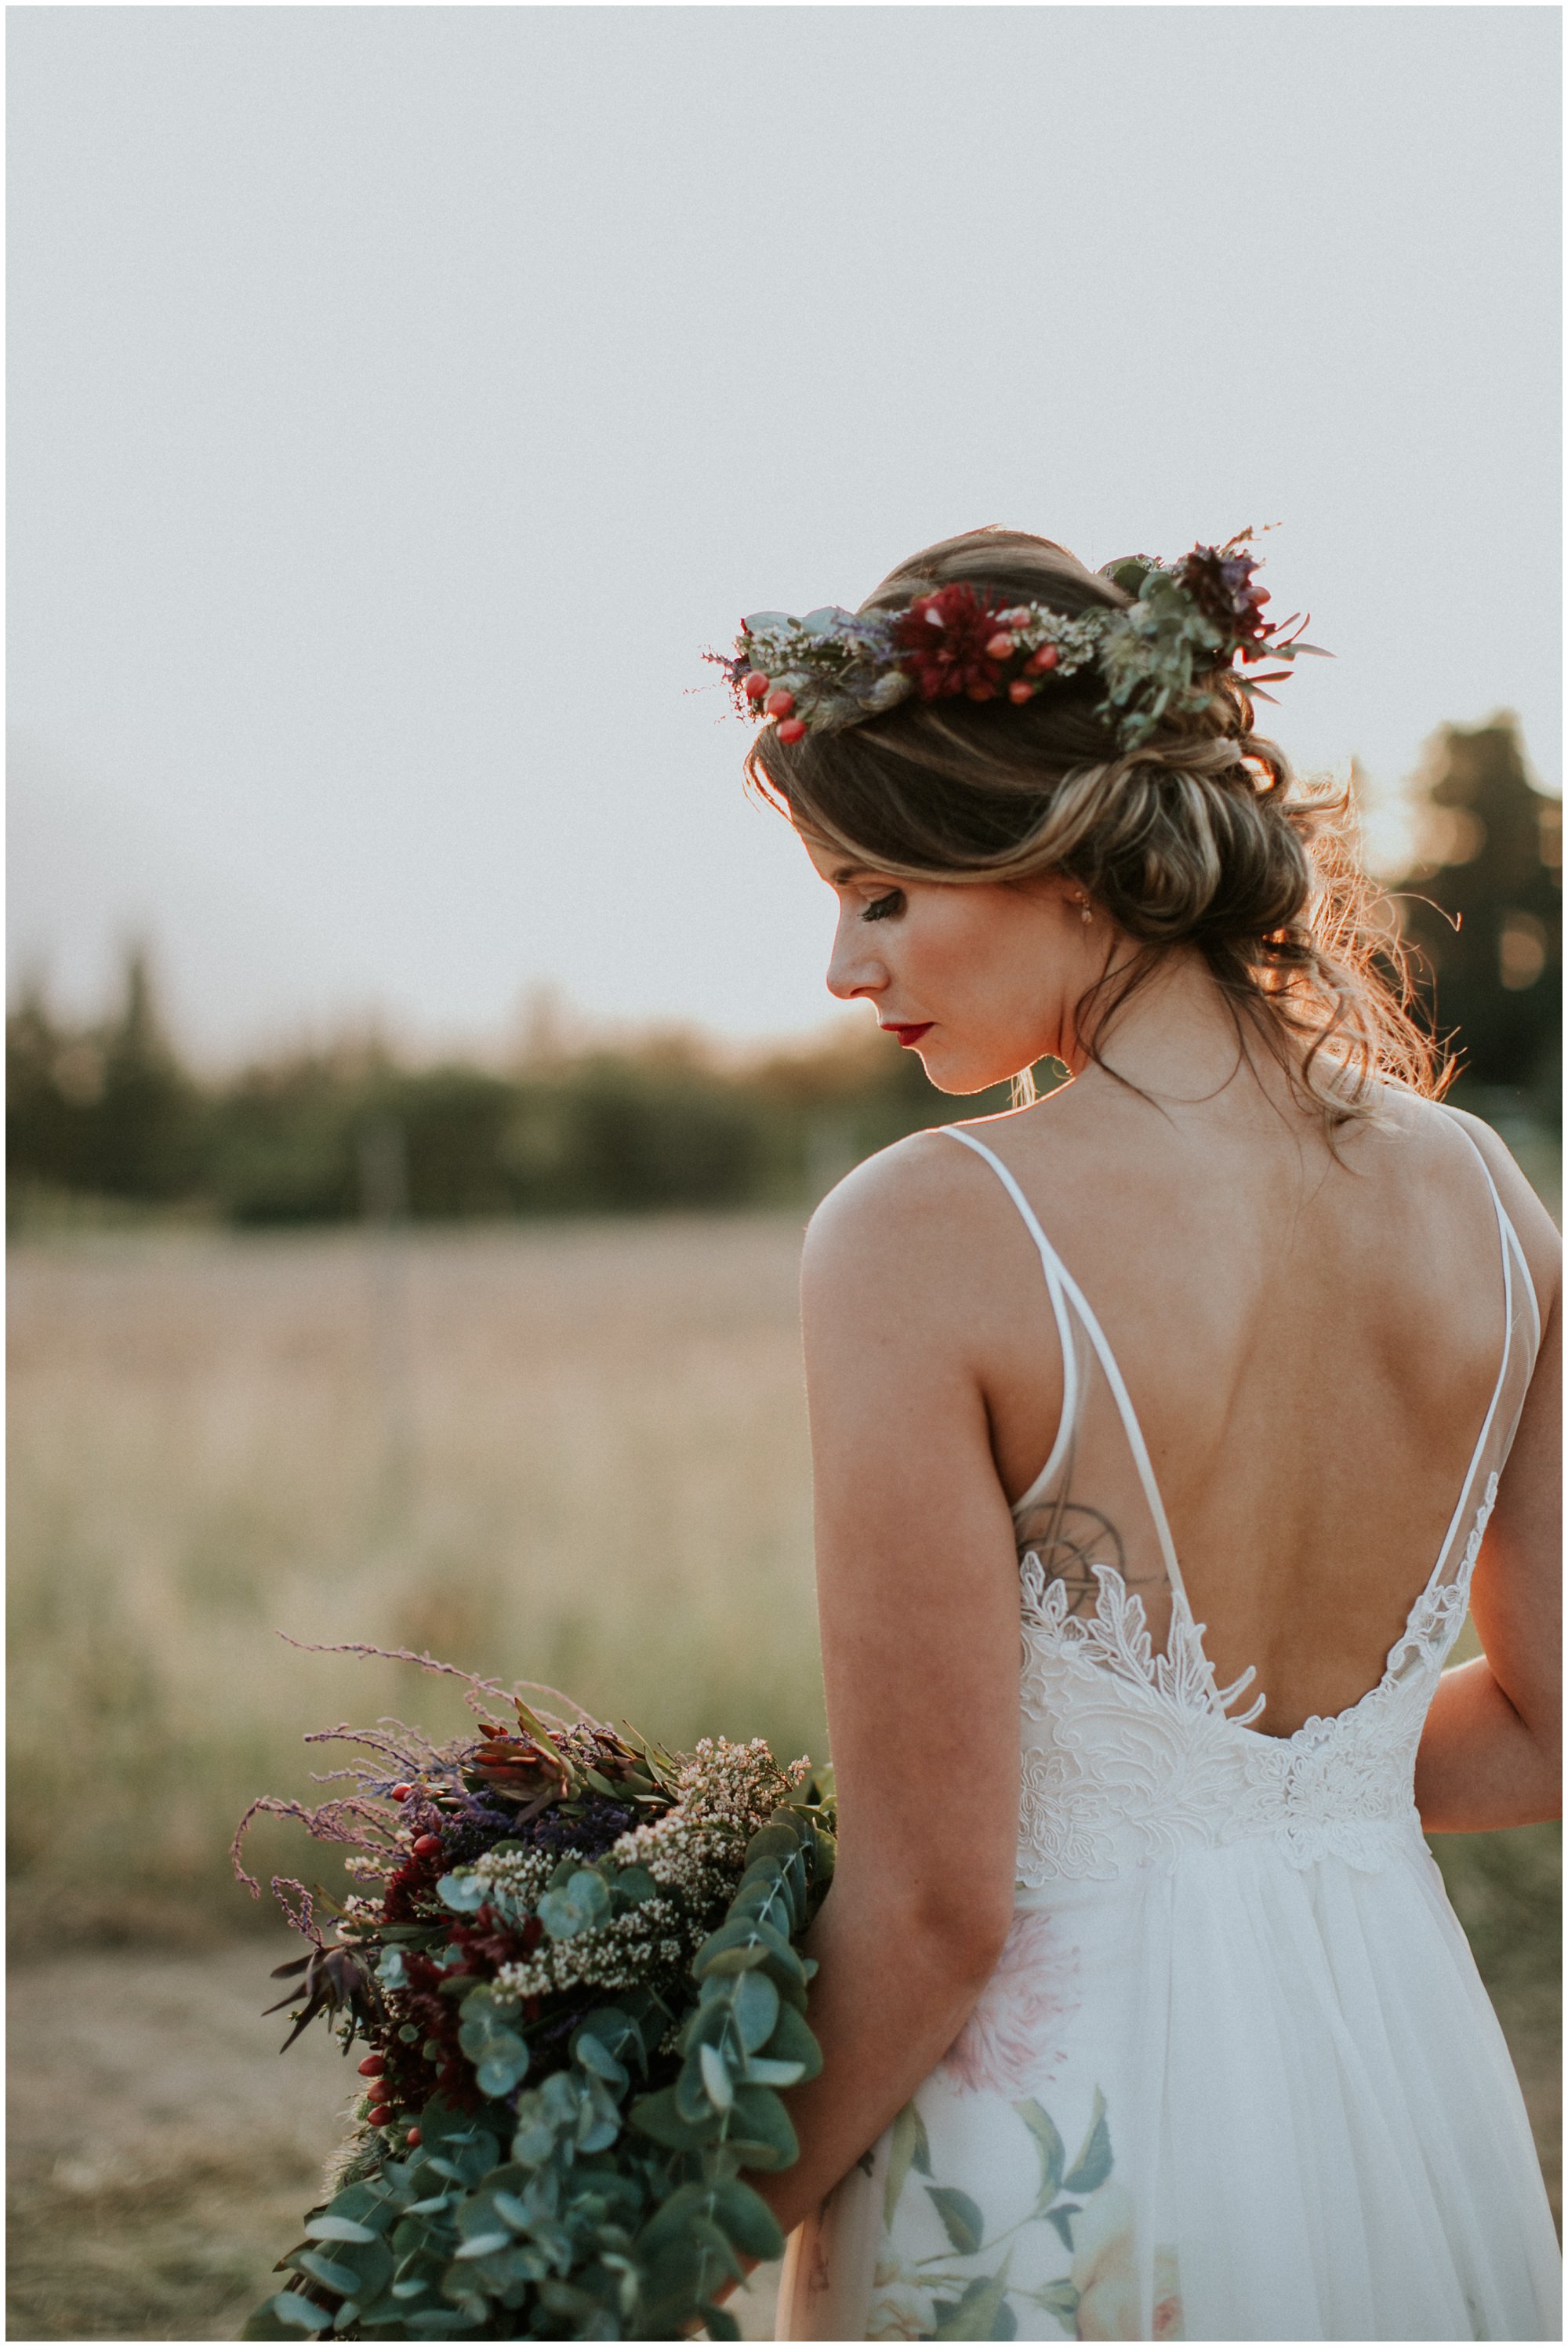 Romantic Sunset Couple Shoot at an Outdoor Bohemian Destination Wedding at Francine’s Venue in Hoedspruit Limpopo by Junebug World's Best Photographer Maryke Albertyn Award Winning International Alternative Moody Photography based in Cape Town South Africa bridal portrait